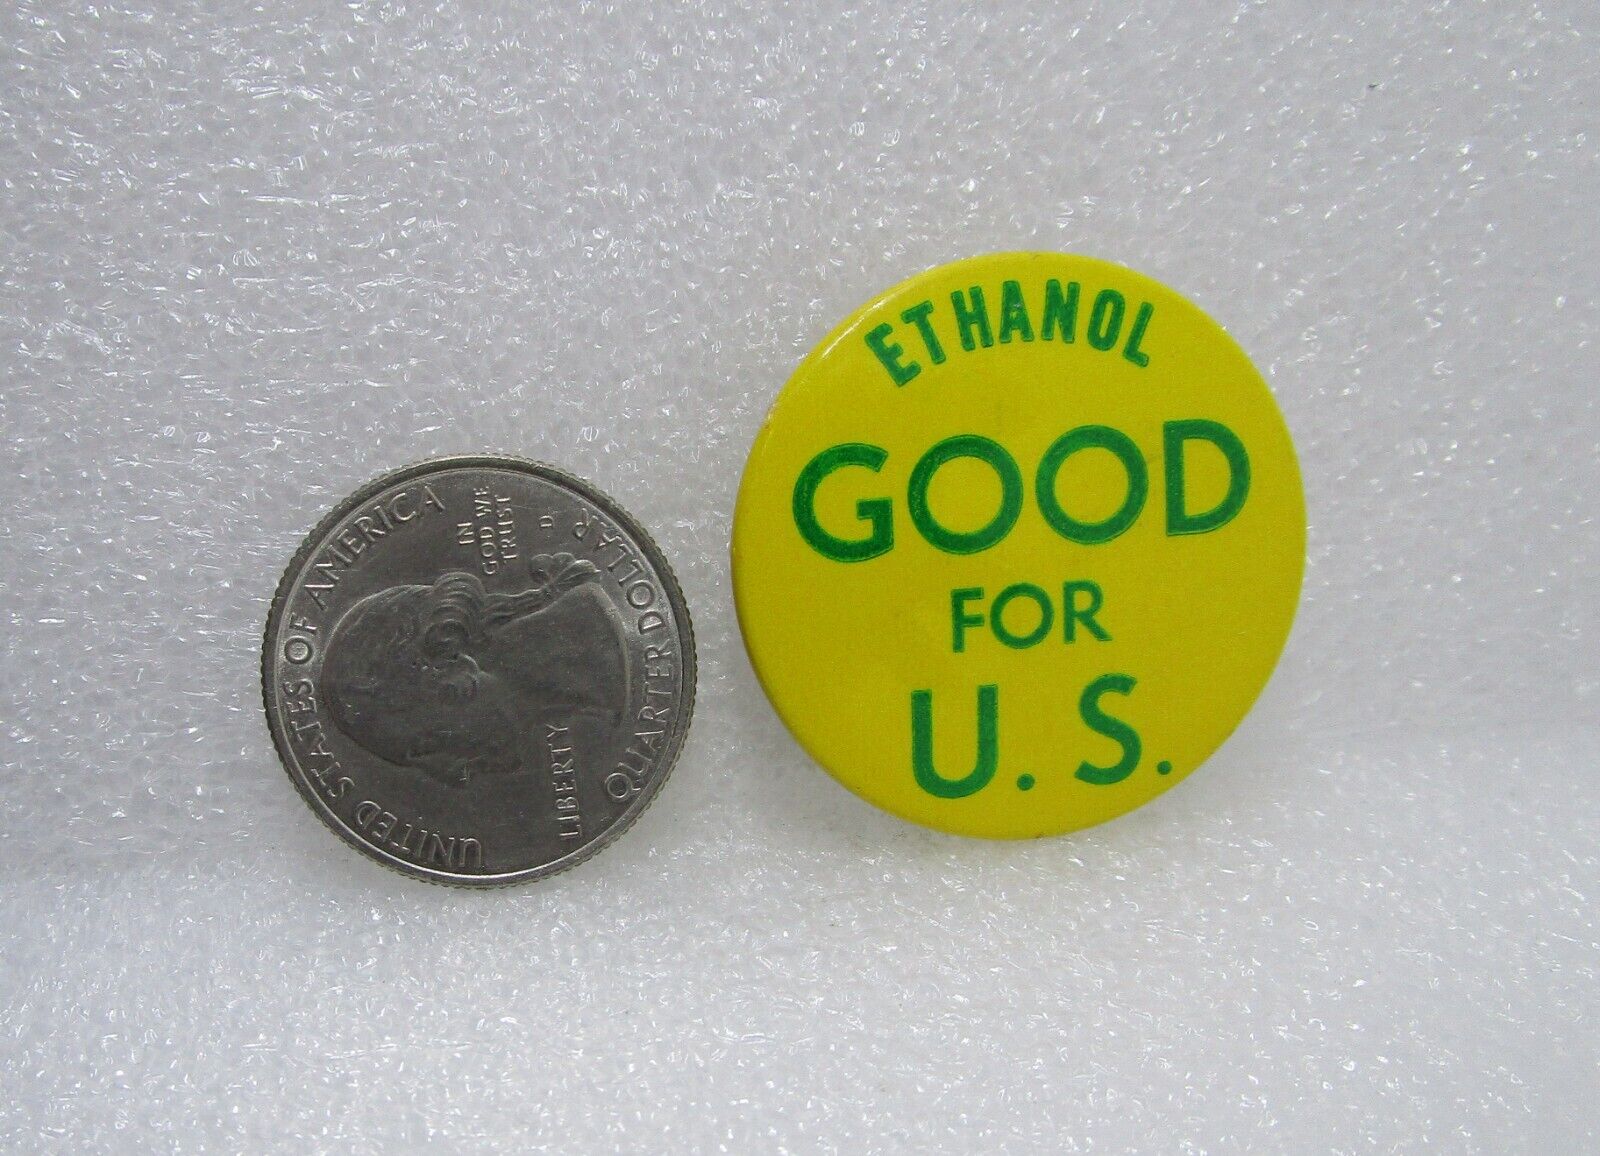 Ethanol Good For U.S. Button Pin